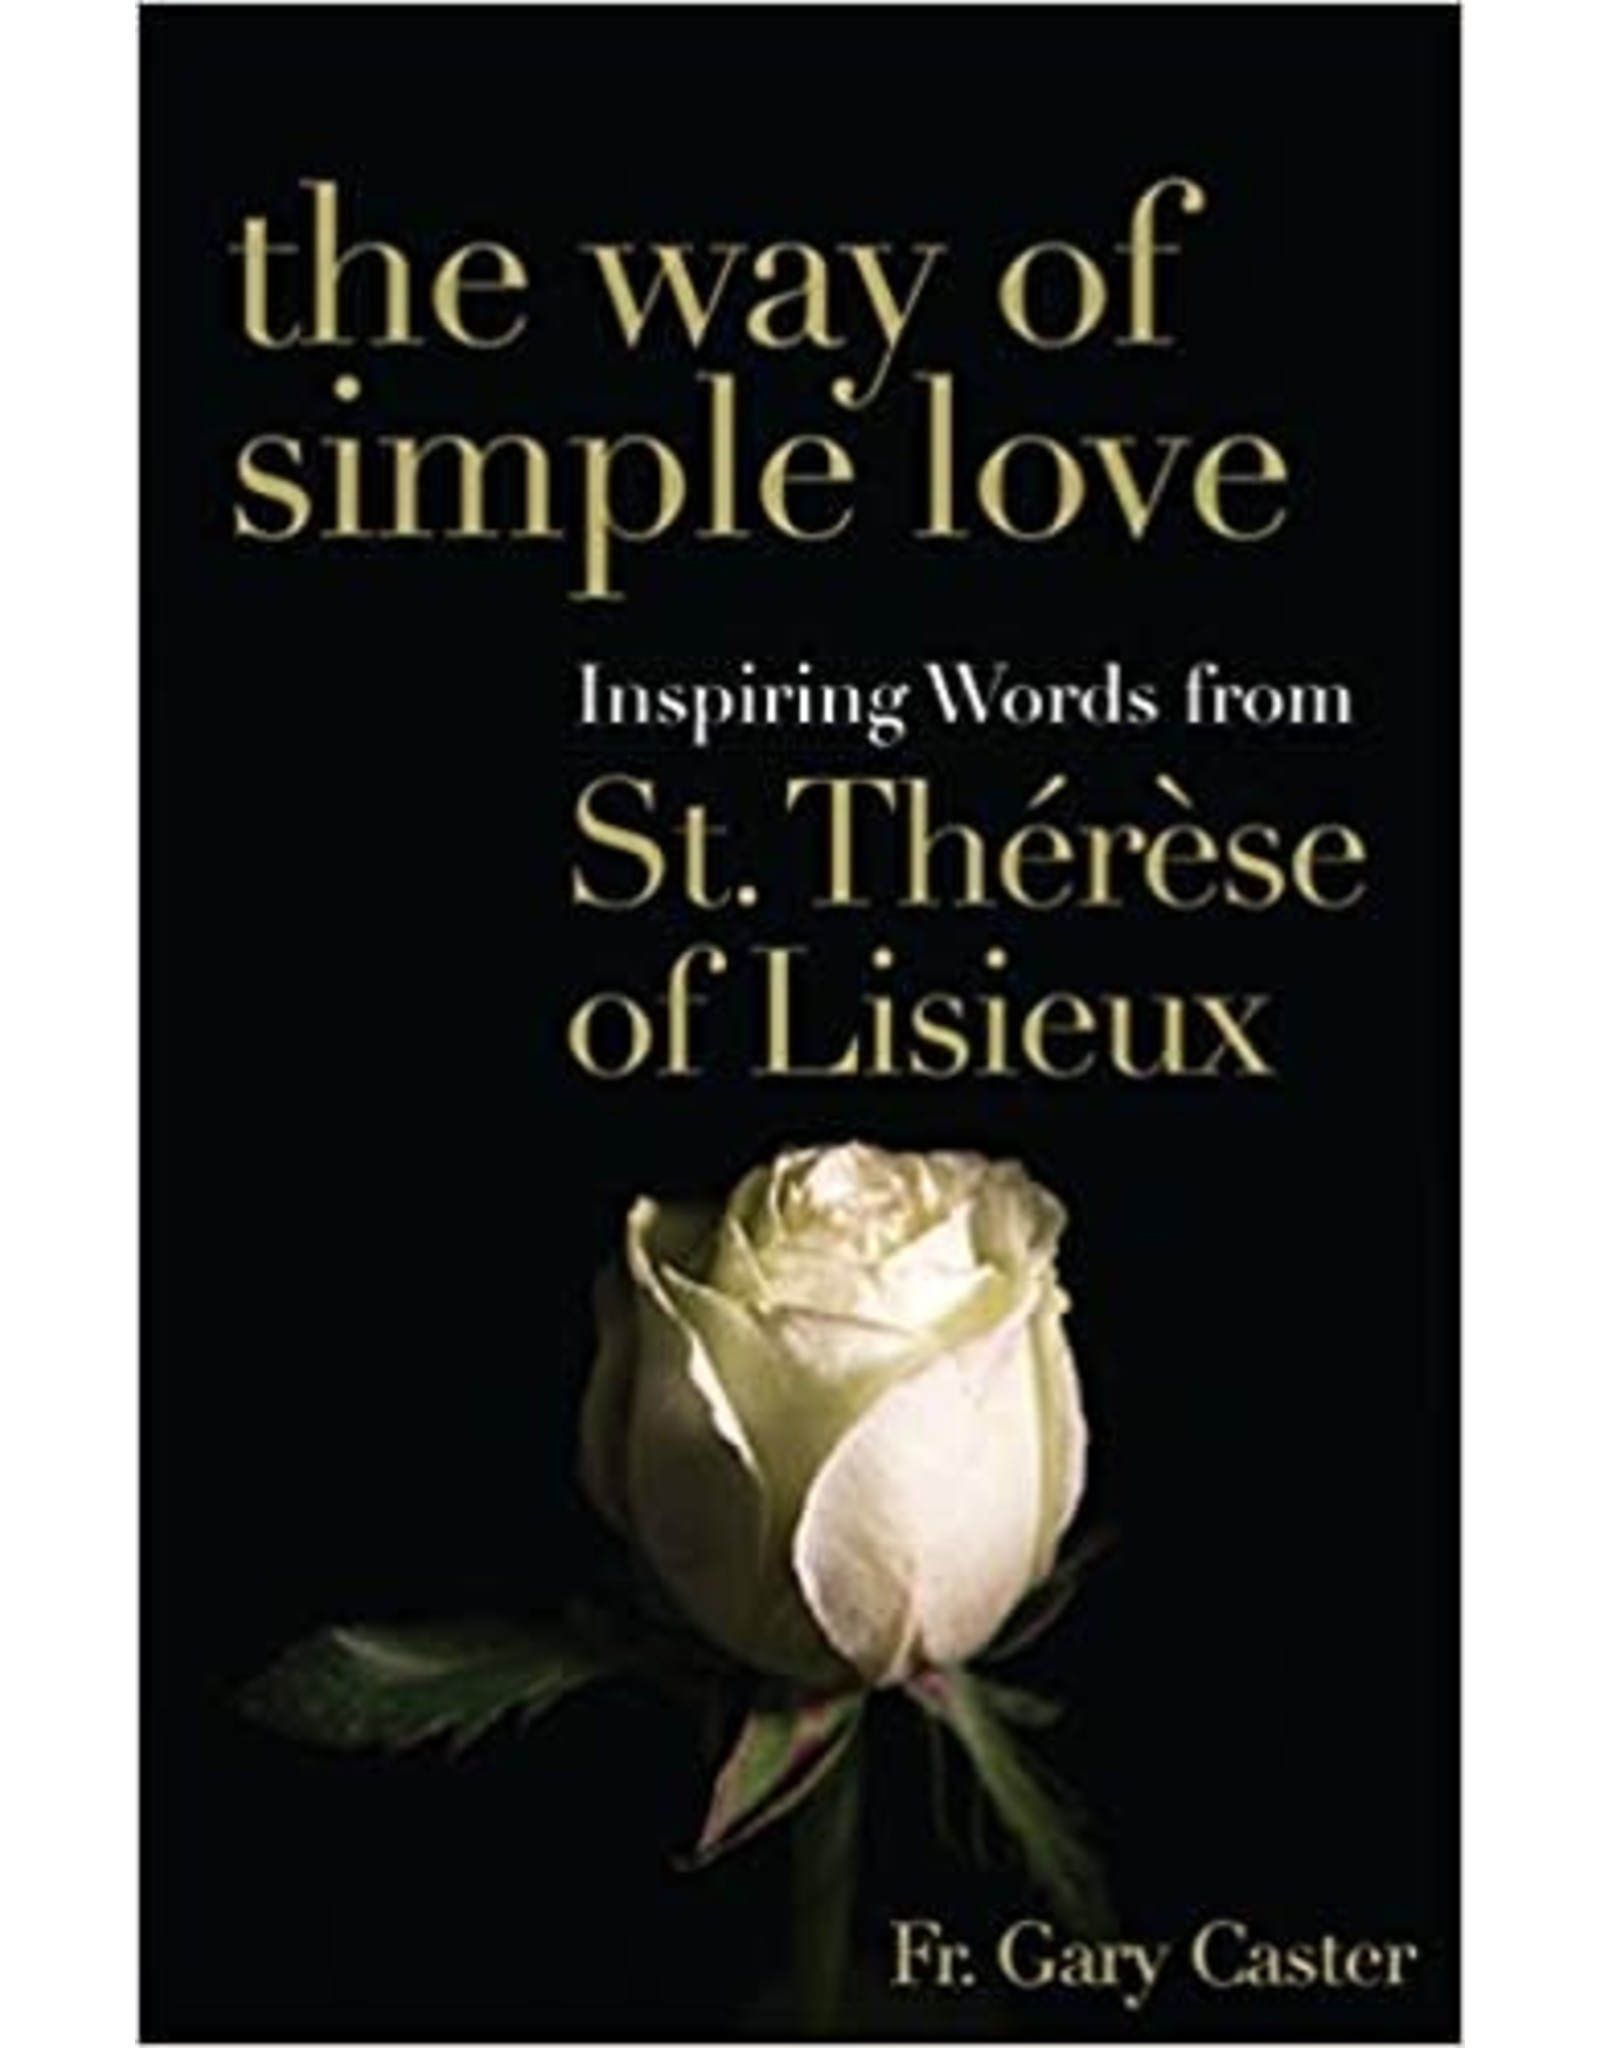 Franciscan Media The Way of Simple Love: Inspiring Words from St. Therese of Lisieux by Fr. Gary Caster (Paperback)